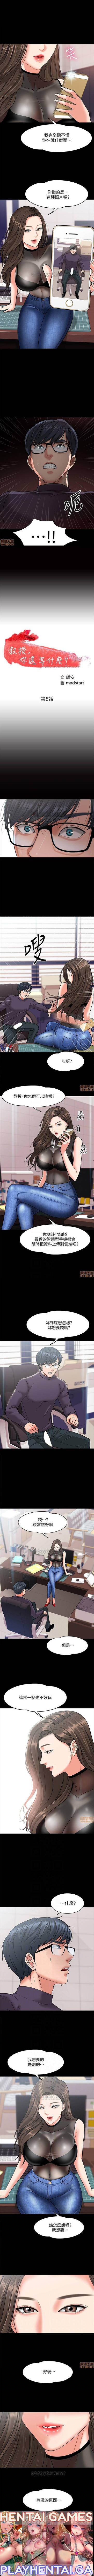 Gay Gangbang PROFESSOR, ARE YOU JUST GOING TO LOOK AT ME? | DESIRE SWAMP | 教授，你還等什麼? Ch. 5 [Chinese] Manhwa Best - Page 2